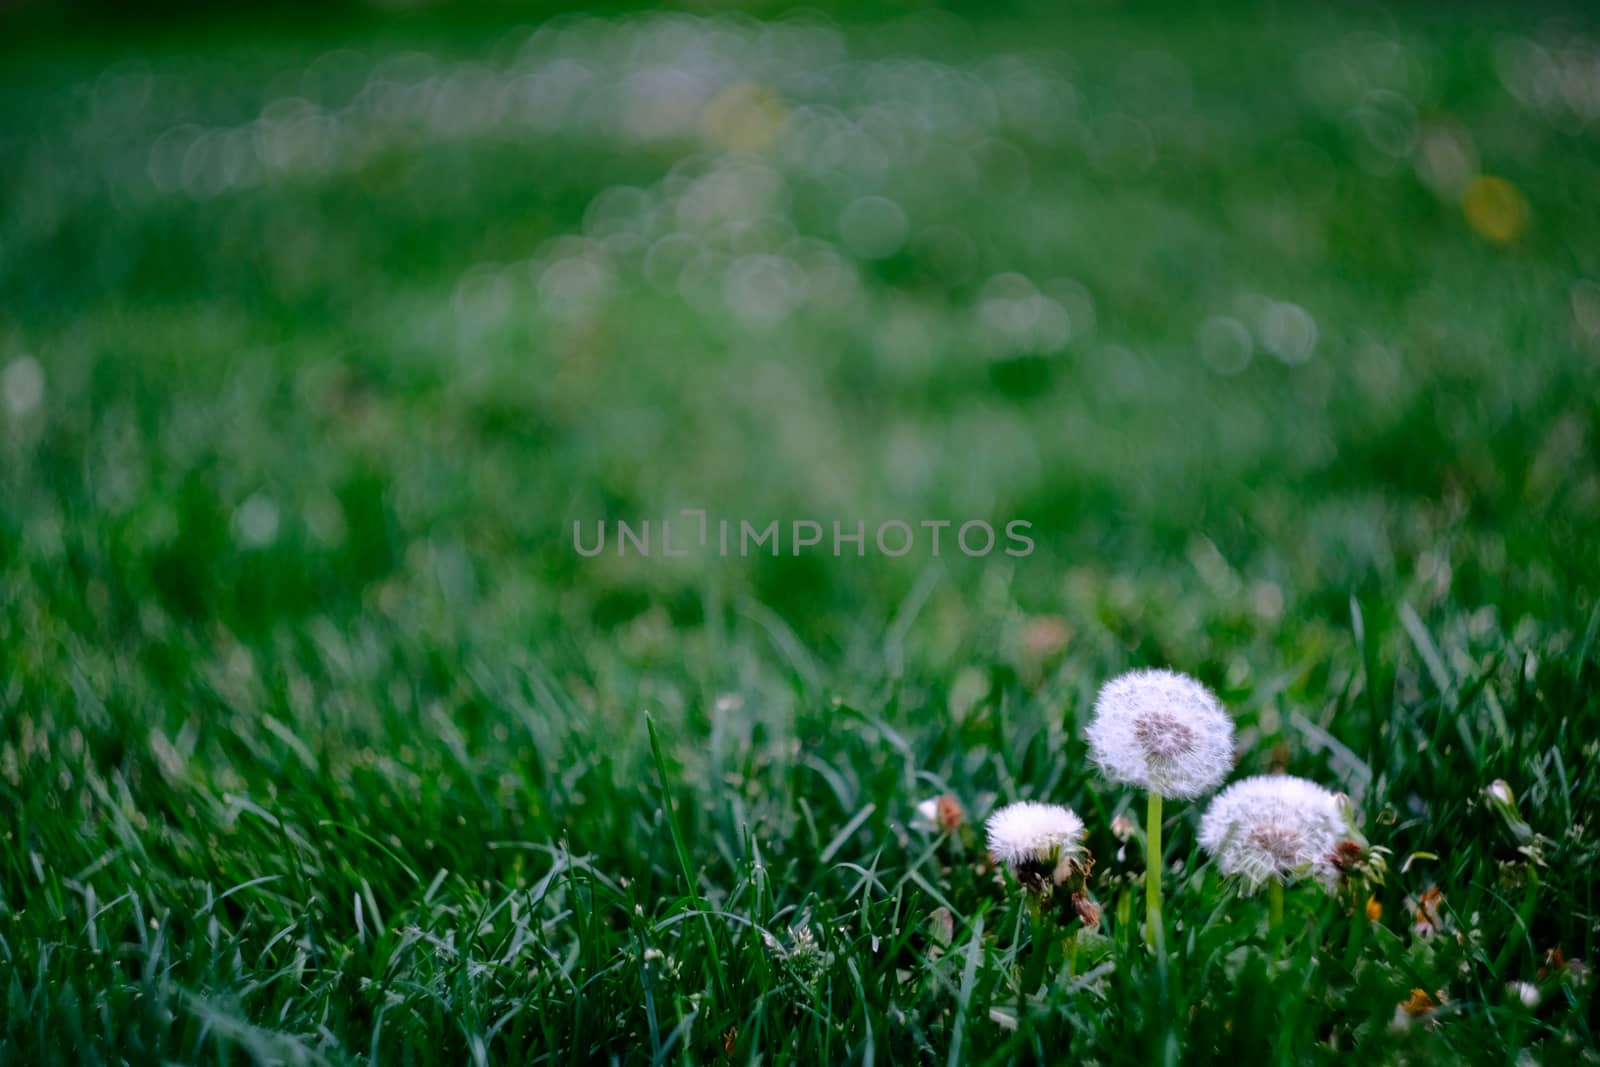 Three dandelions in a podium like formation come from the grass with several blurred flowers in the background in Pamplona, Spain by mikelju